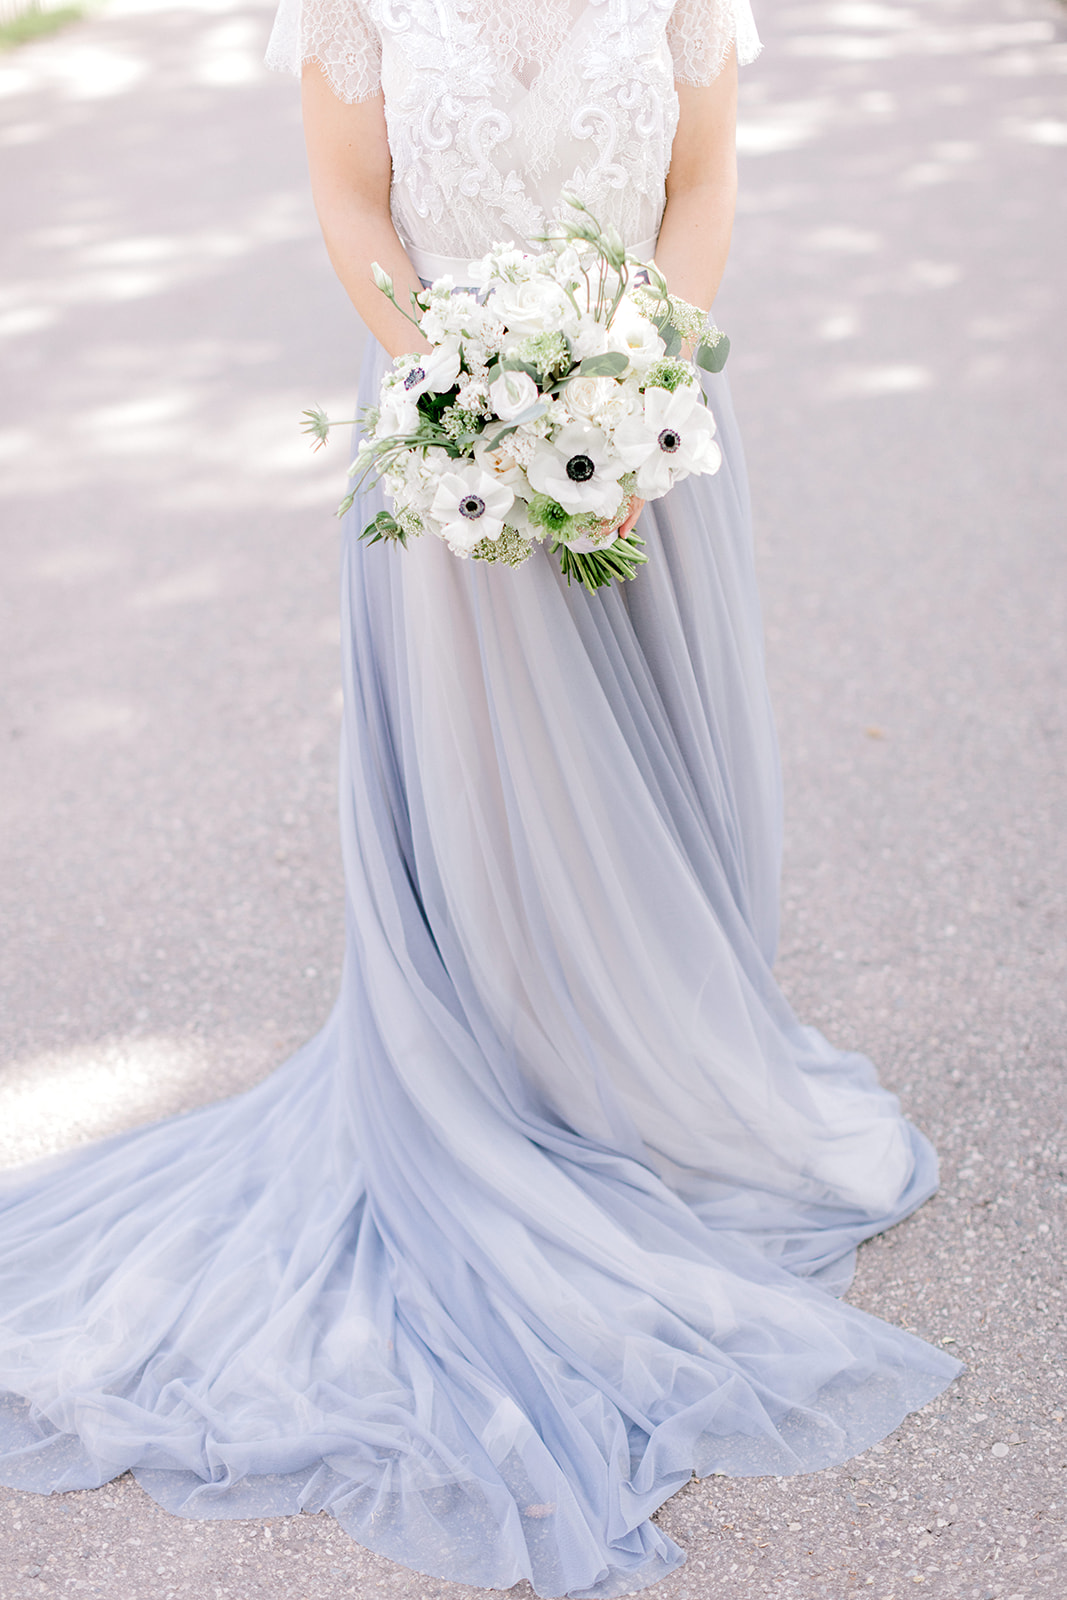 Vintage Inspired Cream and Light Blue Wedding Inspiration Photographed by Nicole Sarah Photography